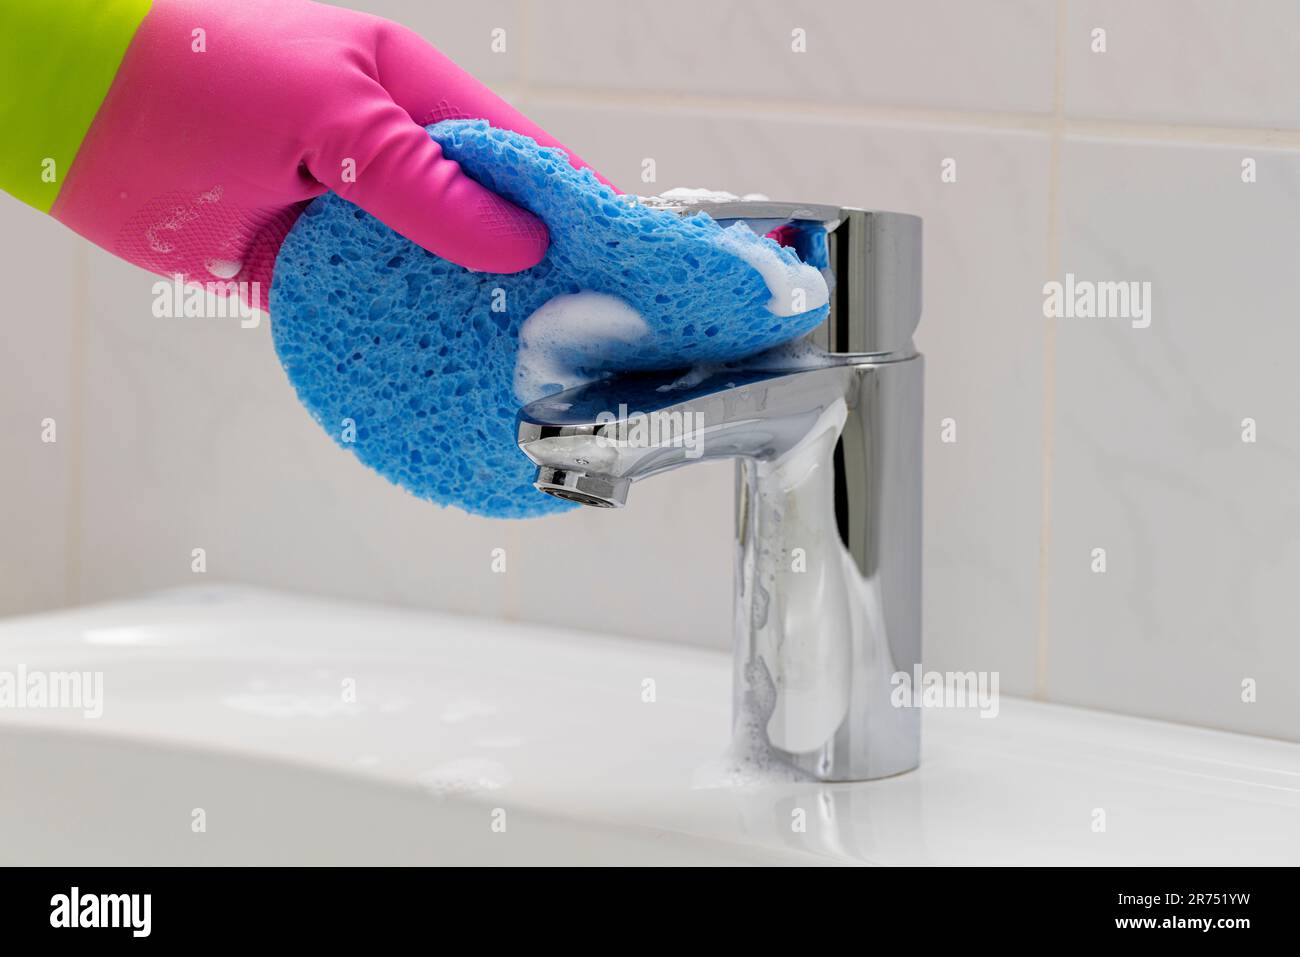 Bathroom, faucet faucet cleaning, cleaning sponge, hand sink, detail, Stock Photo